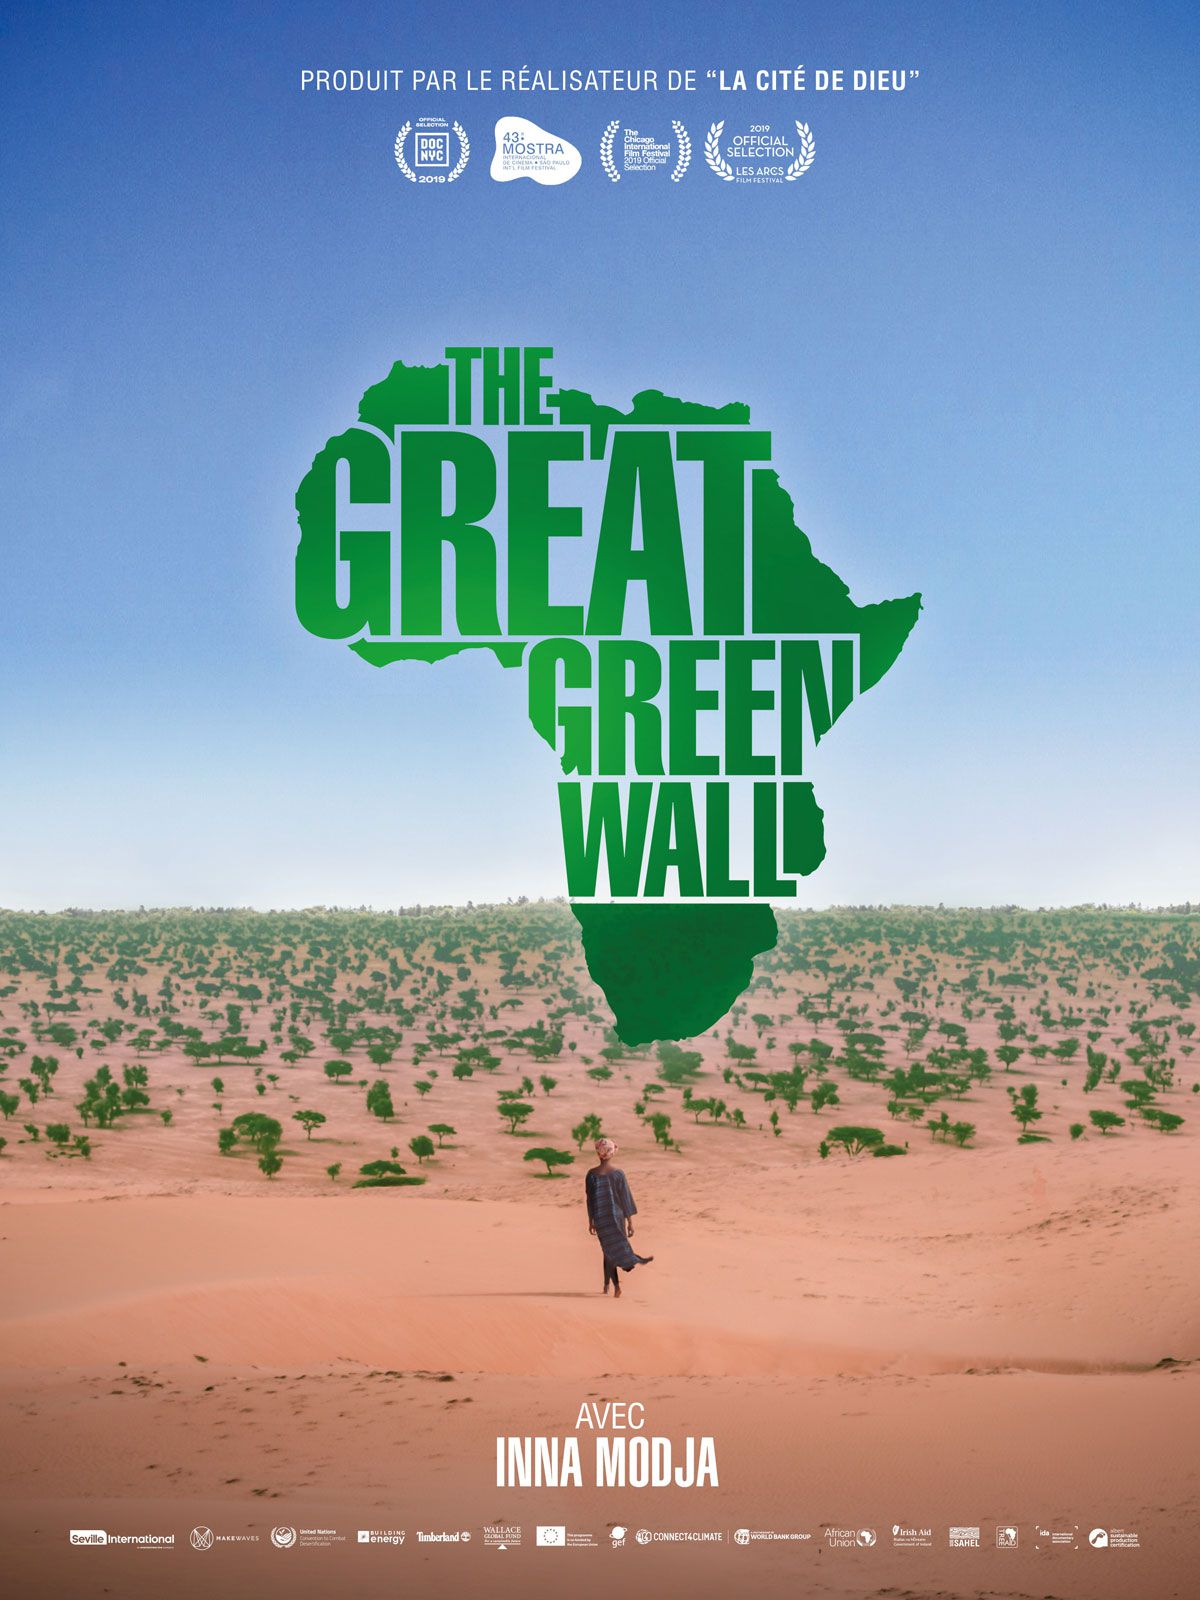 The Great Green Wall - Documentaire (2020) streaming VF gratuit complet